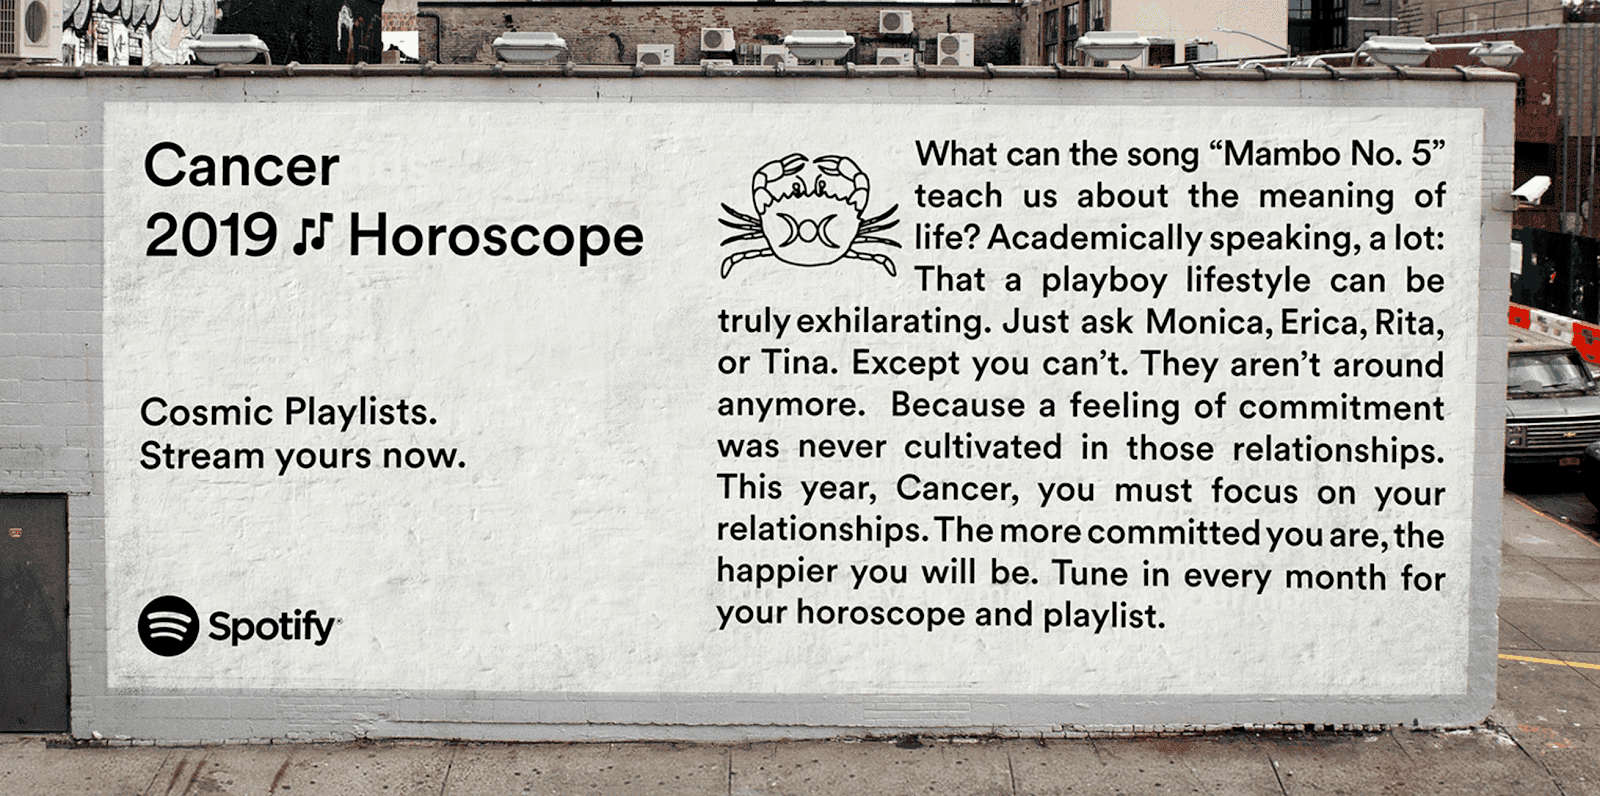 Example of horoscope playlists on Spotify